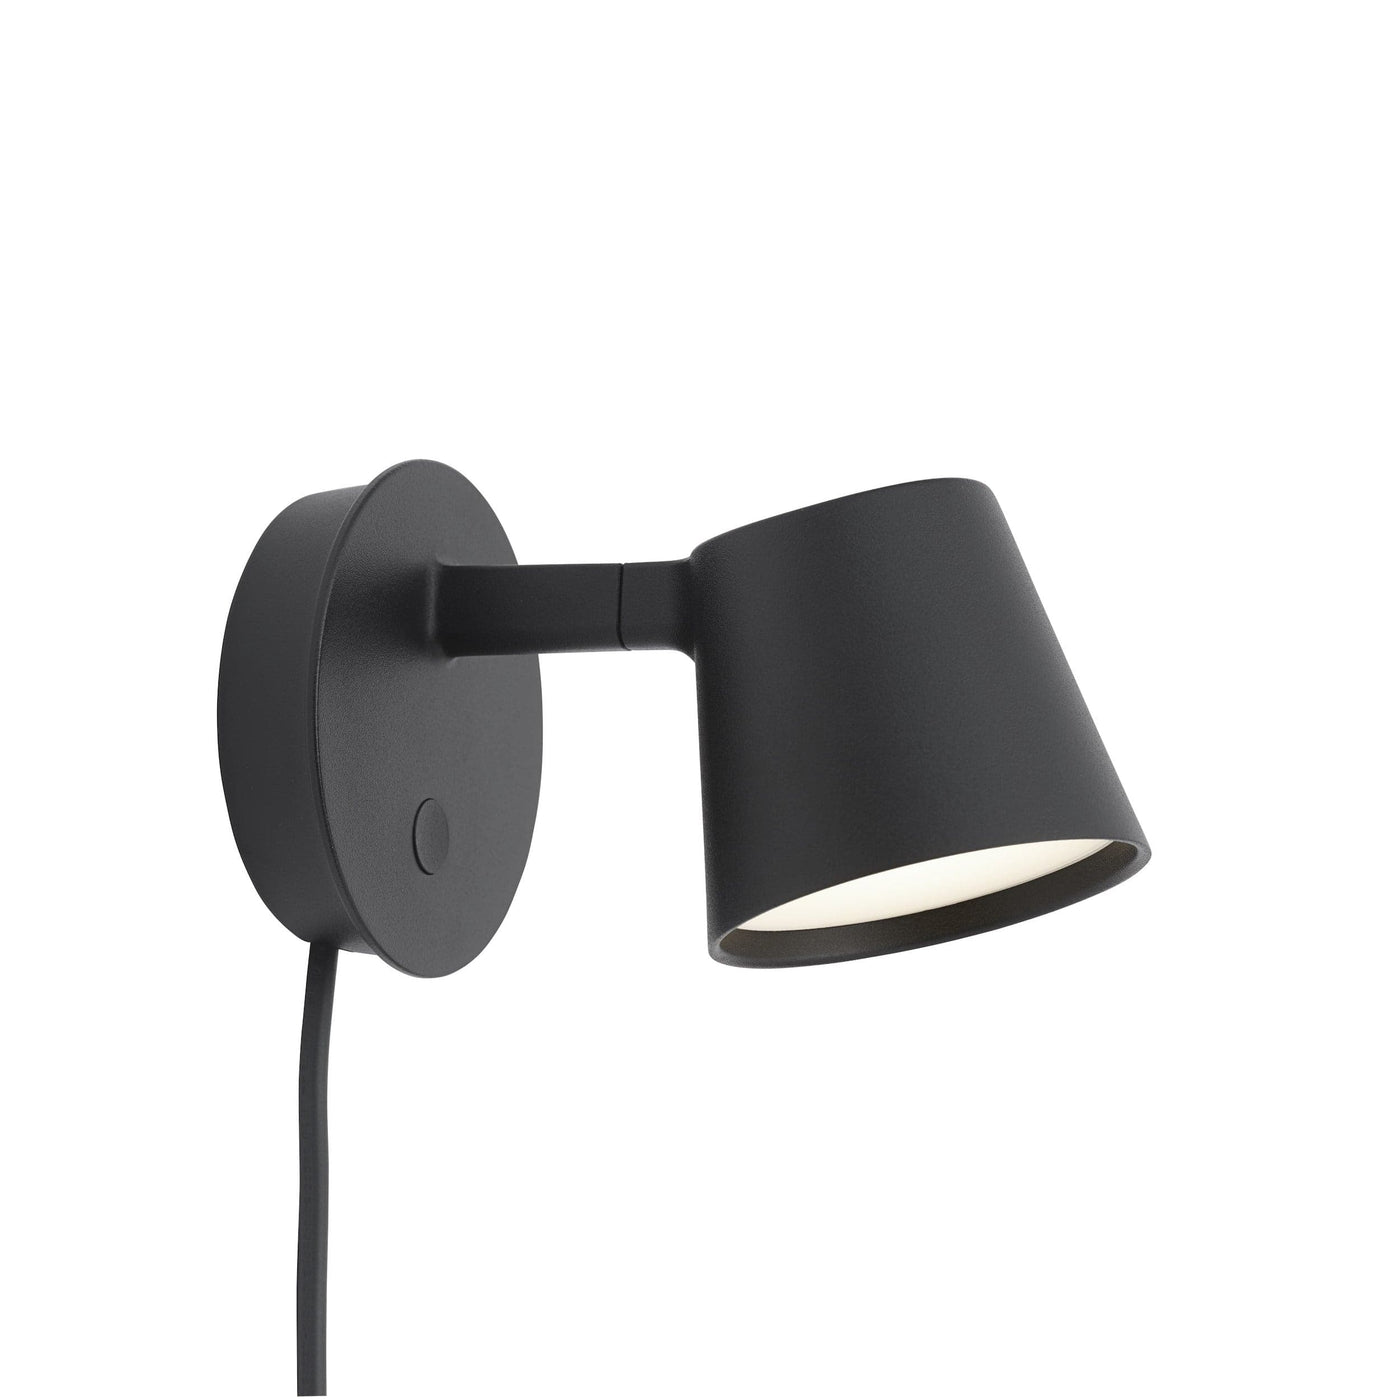 Muuto Tip Wall Lamp in black. Available at someday designs.